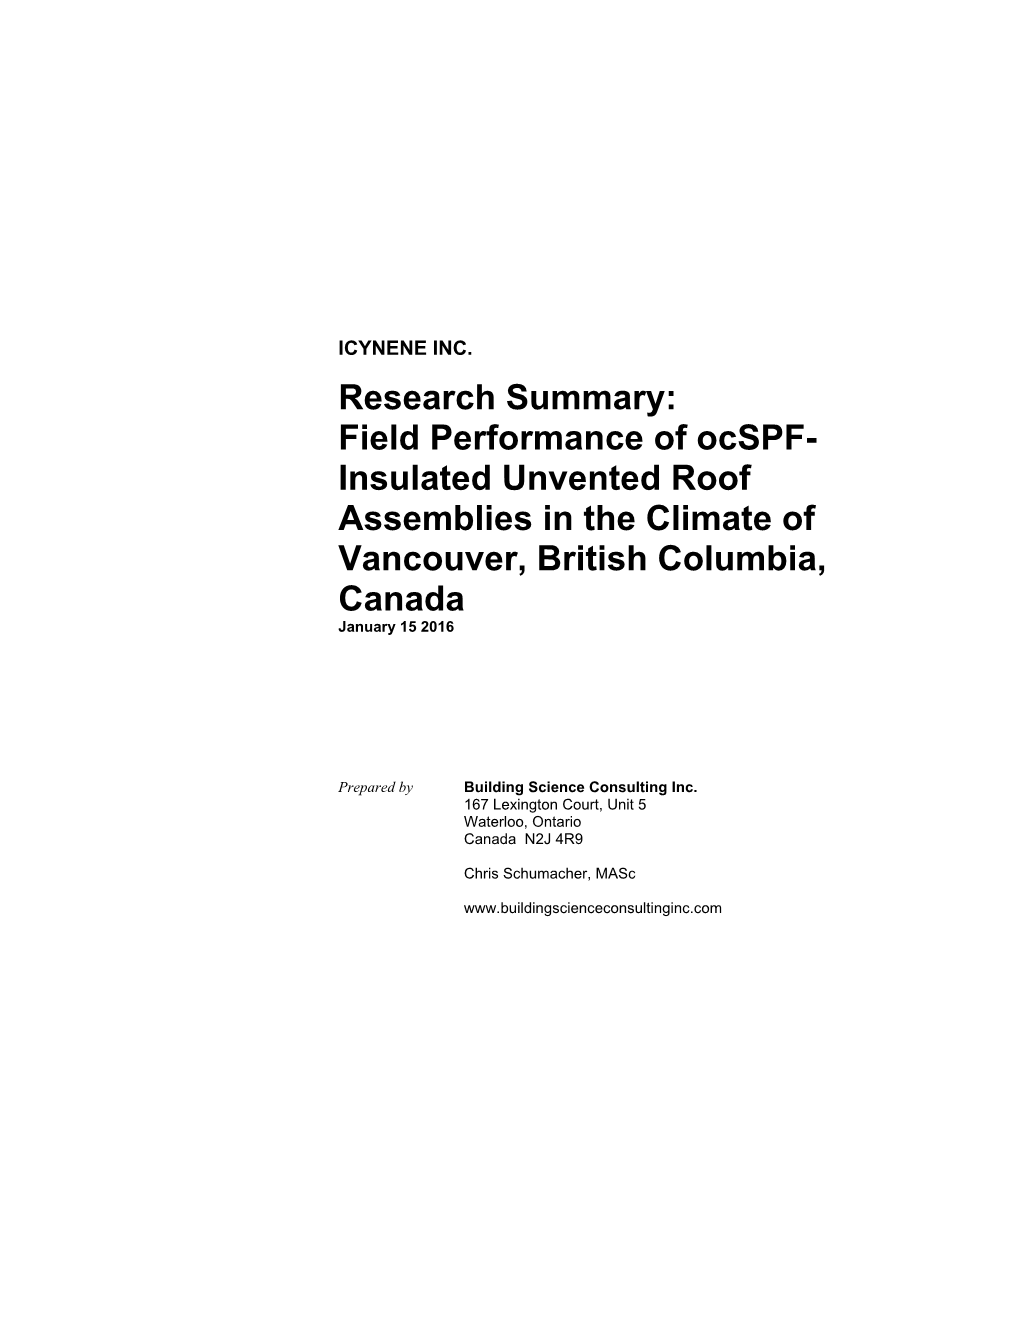 Insulated Unvented Roof Assemblies in the Climate of Vancouver, British Columbia, Canada January 15 2016